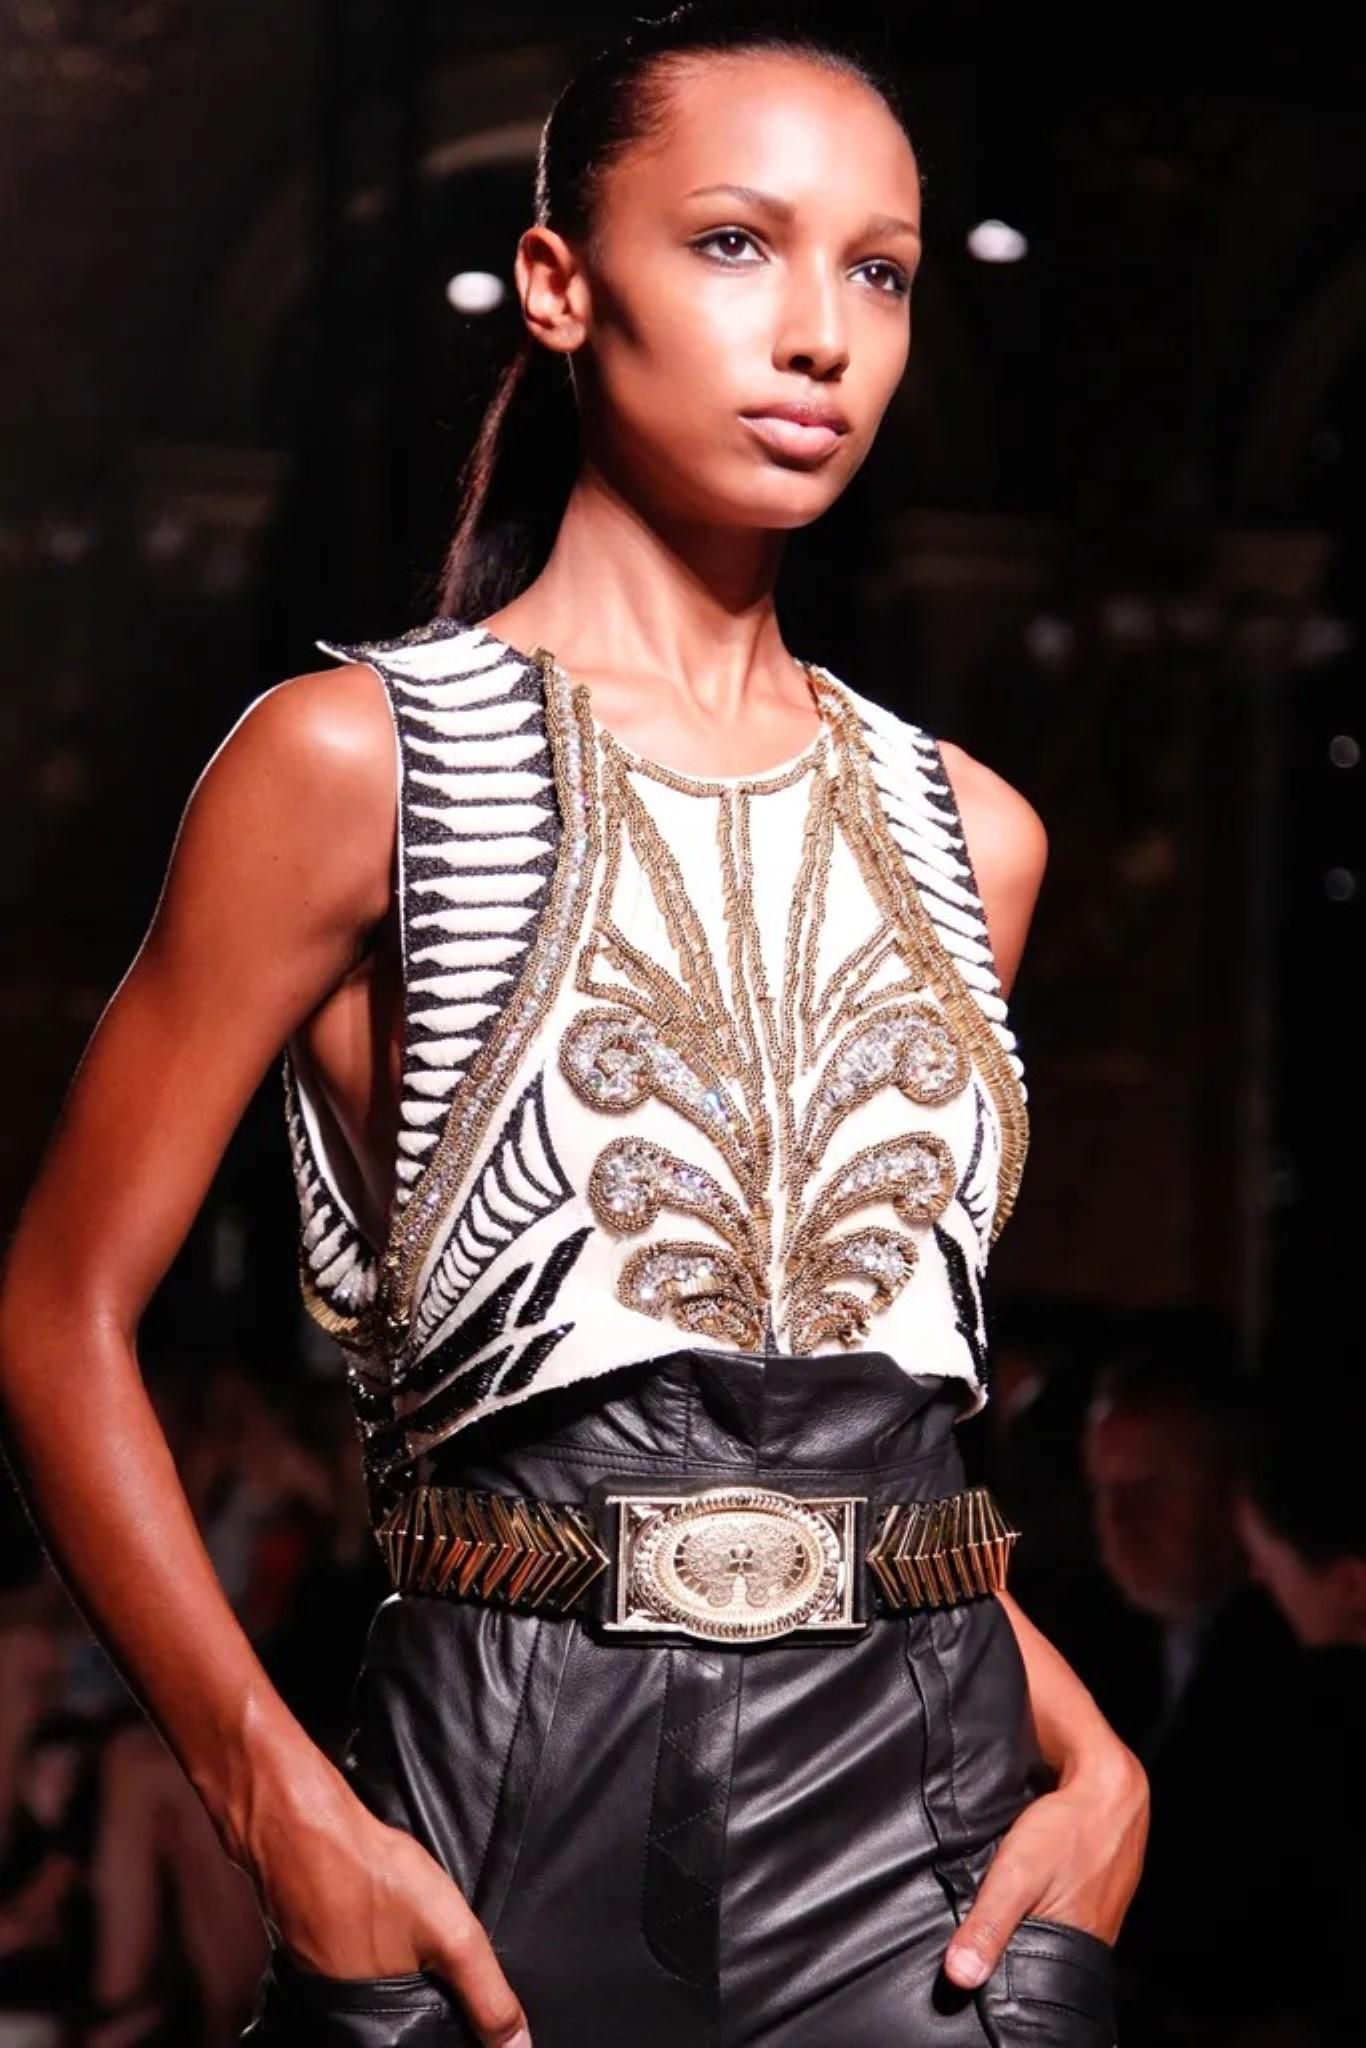 BALMAIN by Olivier Rousteing SS 2012 debut collection dress top comes in a white & black silk featuring a beaded design throughout, sleeveless, cropped, crystal embellishments, and a top shoulder button closure. Made in France. 

Excellent Pre-Owned